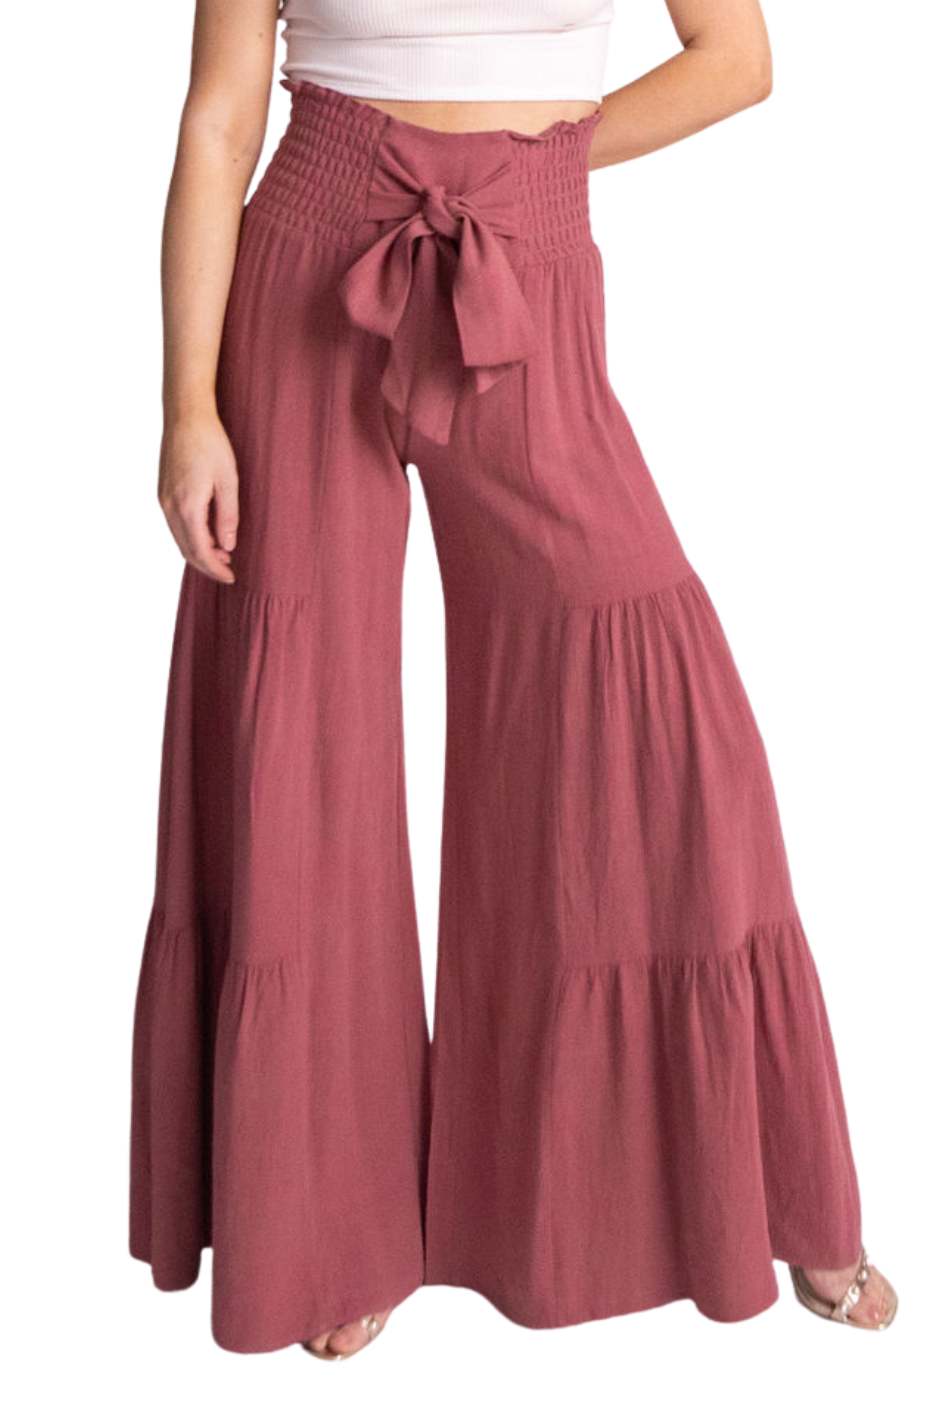 Holy Grail Smocking Waist Tier Wide Pants - Expressive Collective CO.